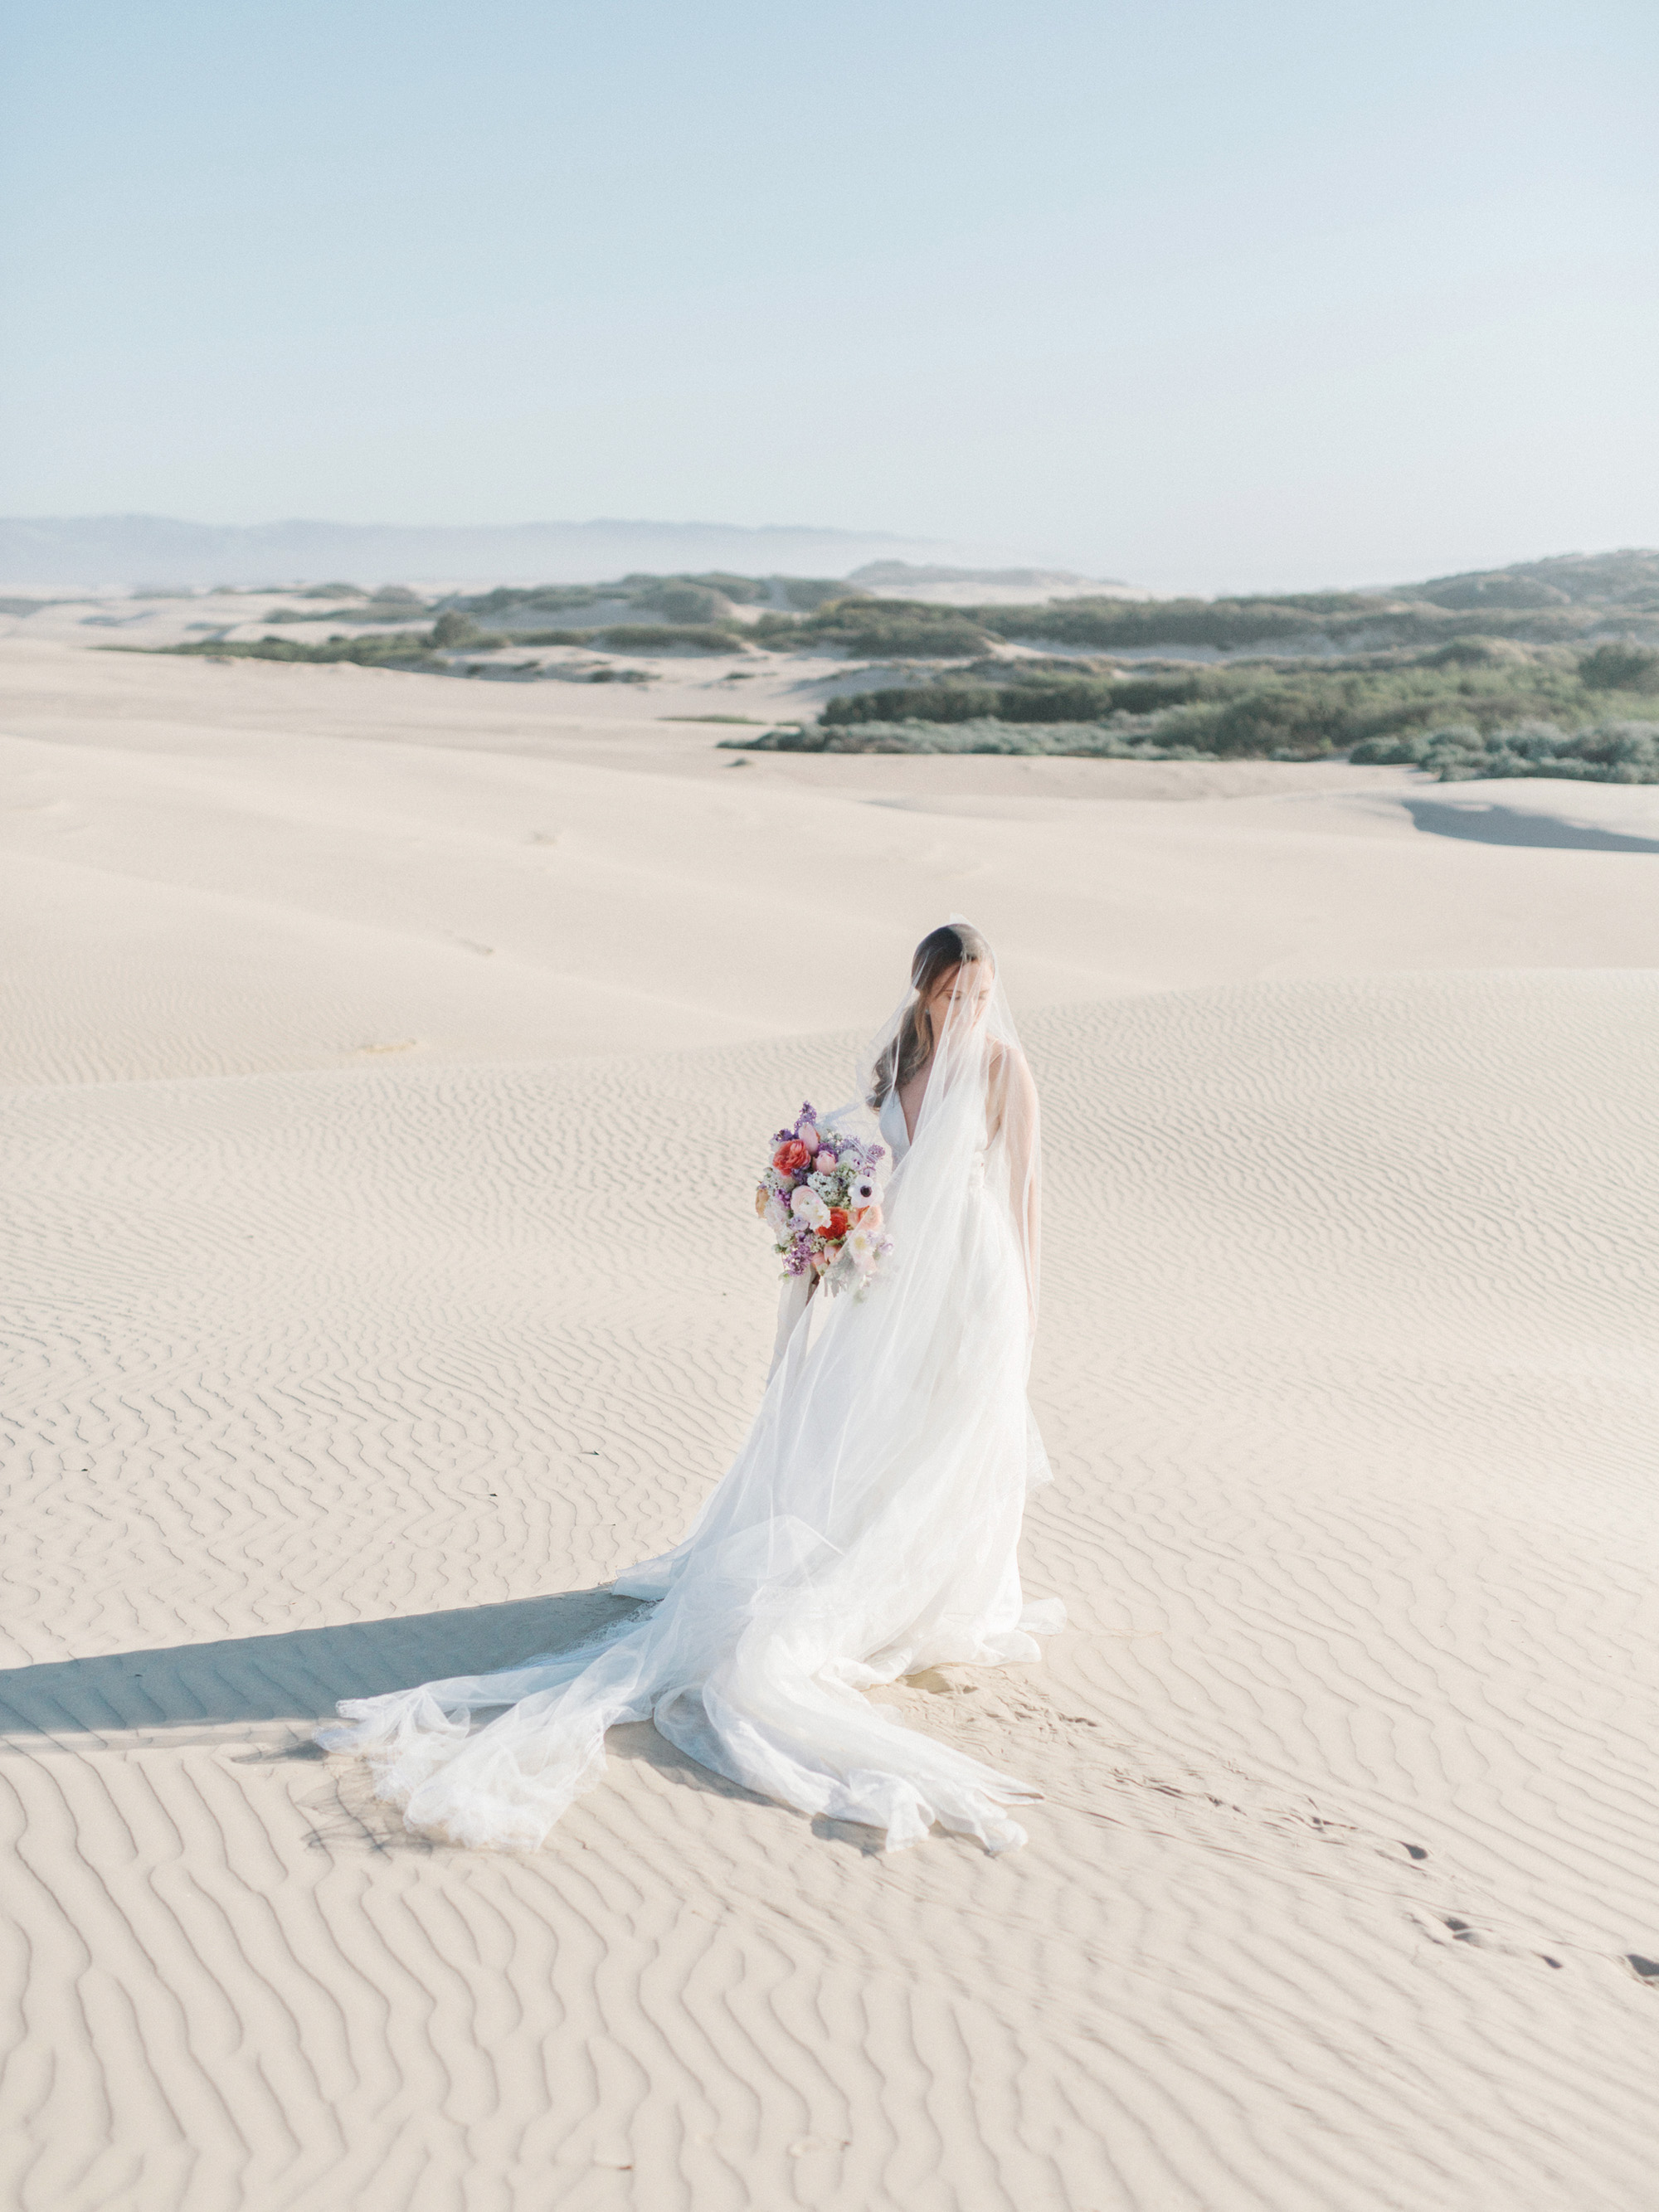 California elopement photographer Tenth & Grace specializes in romantic elopements and intimate weddings in Santa Barbara and throughout California.